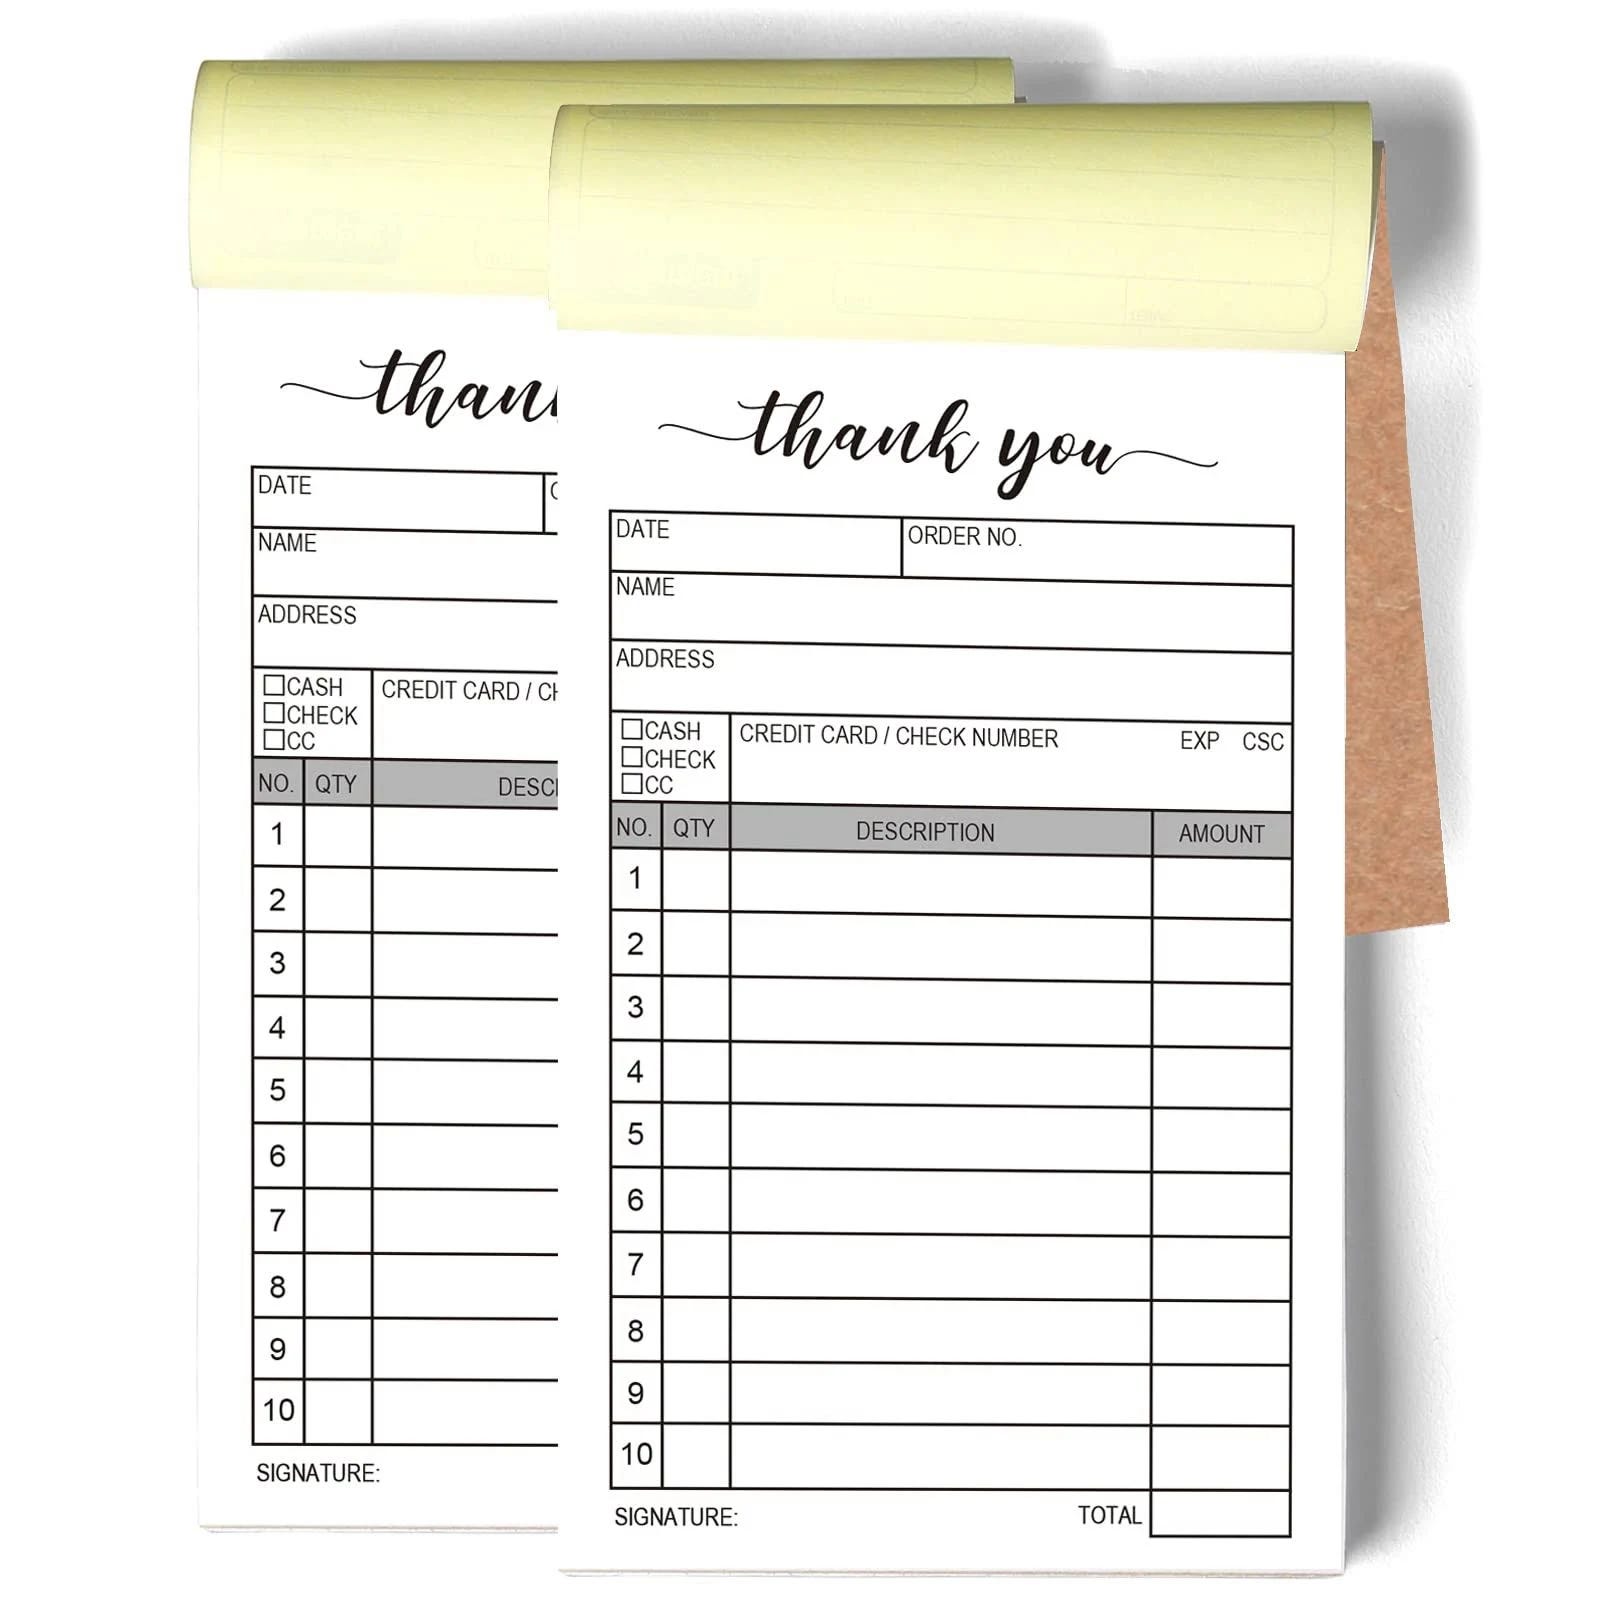 Thank You Receipt Book for Stores, Warehouses, and Offices - 50-Set | Image